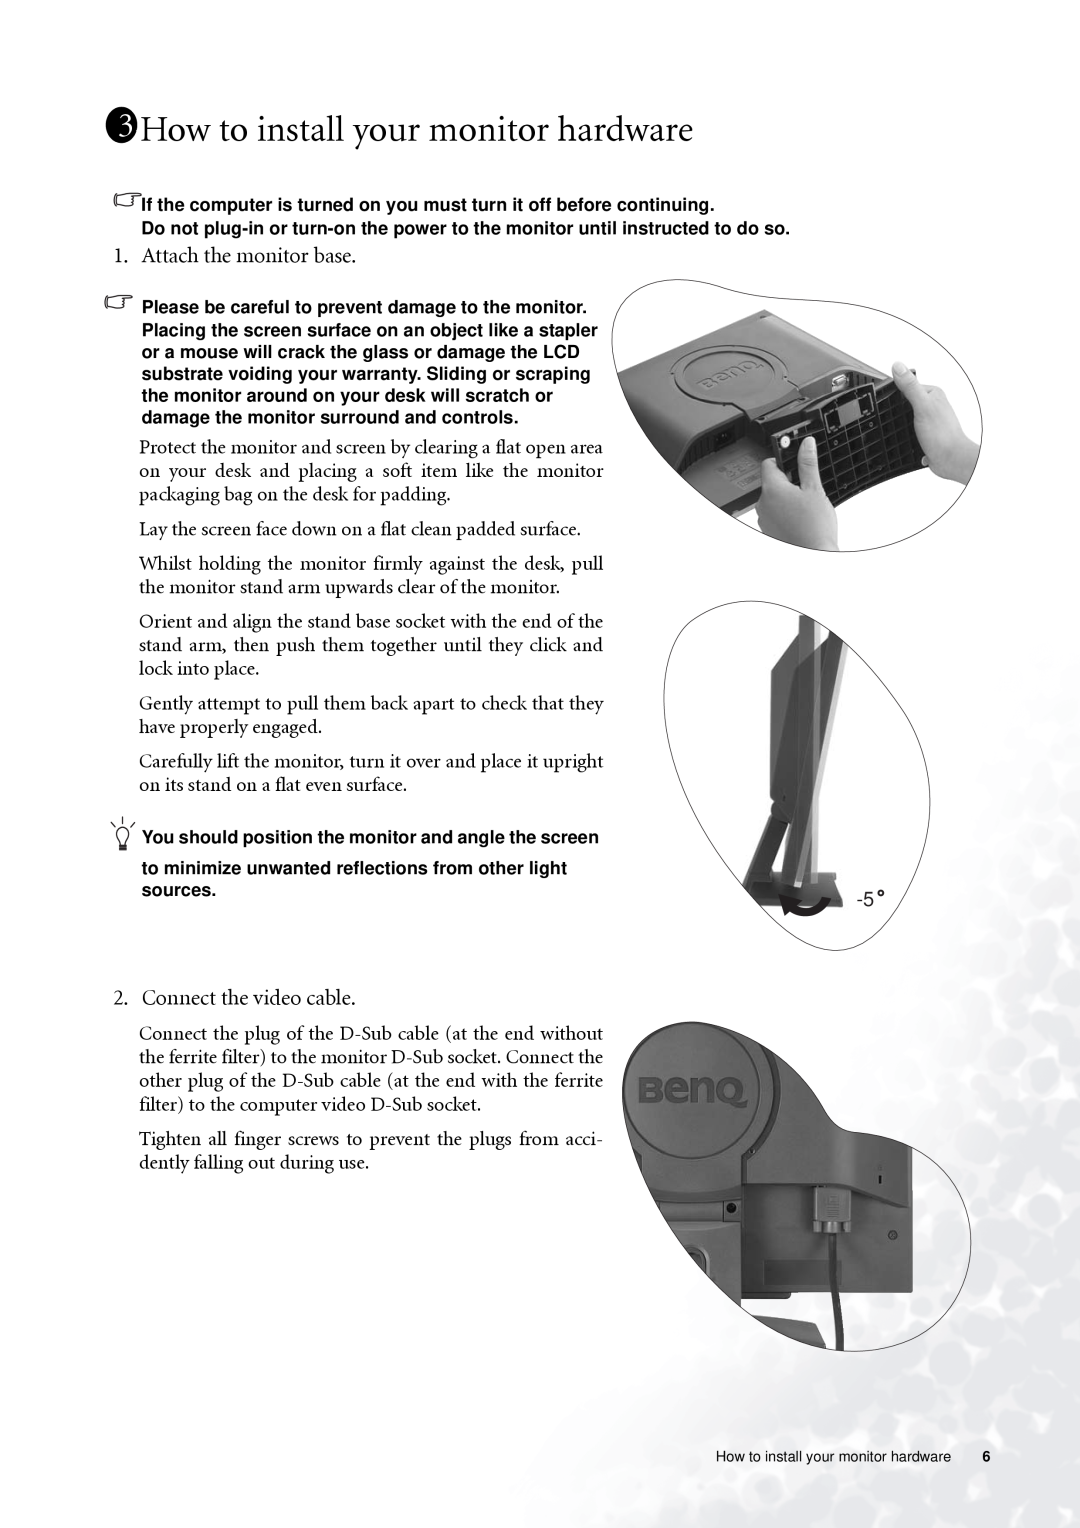 BenQ FP71G+ user manual 1311How to install your monitor hardware, Attach the monitor base, Connect the video cable 